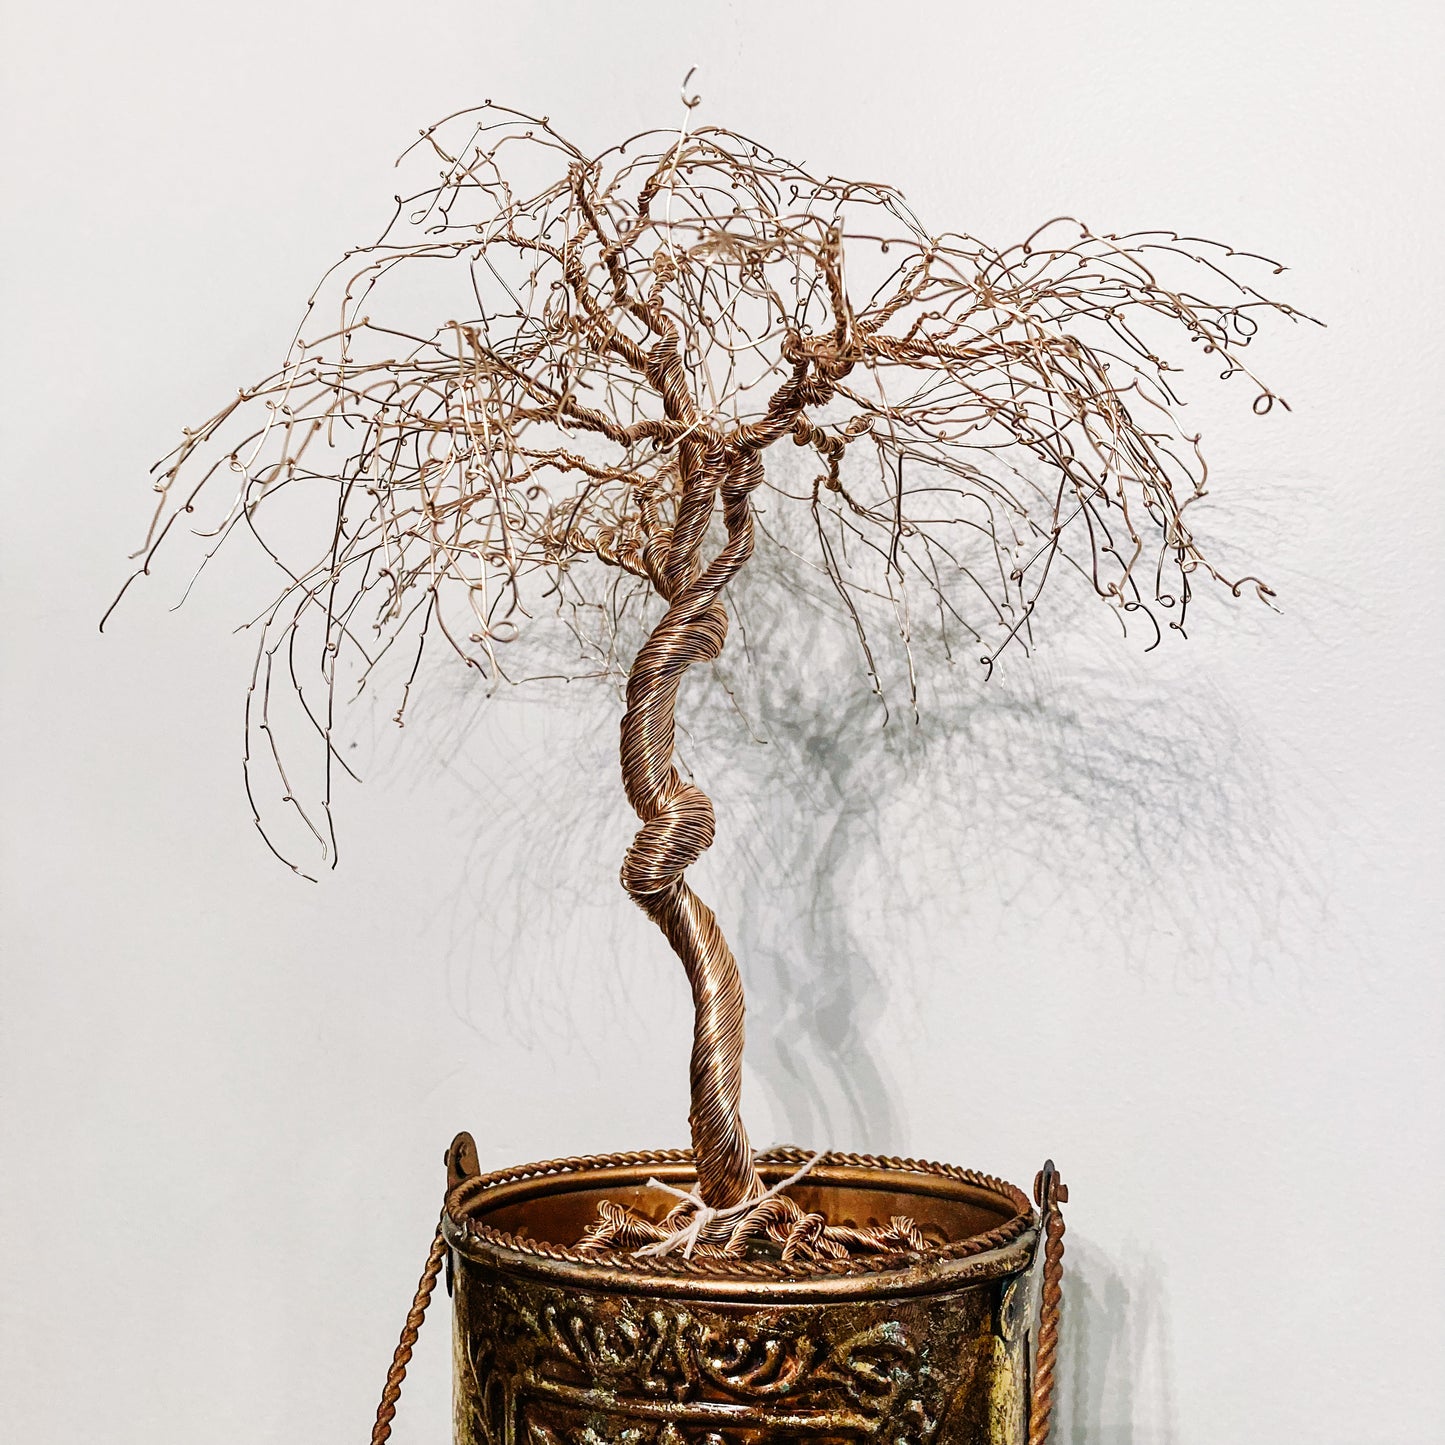 Golden Grove: Handcrafted 15" Wire Tree Sculpture in Brass Pot by Don Corn